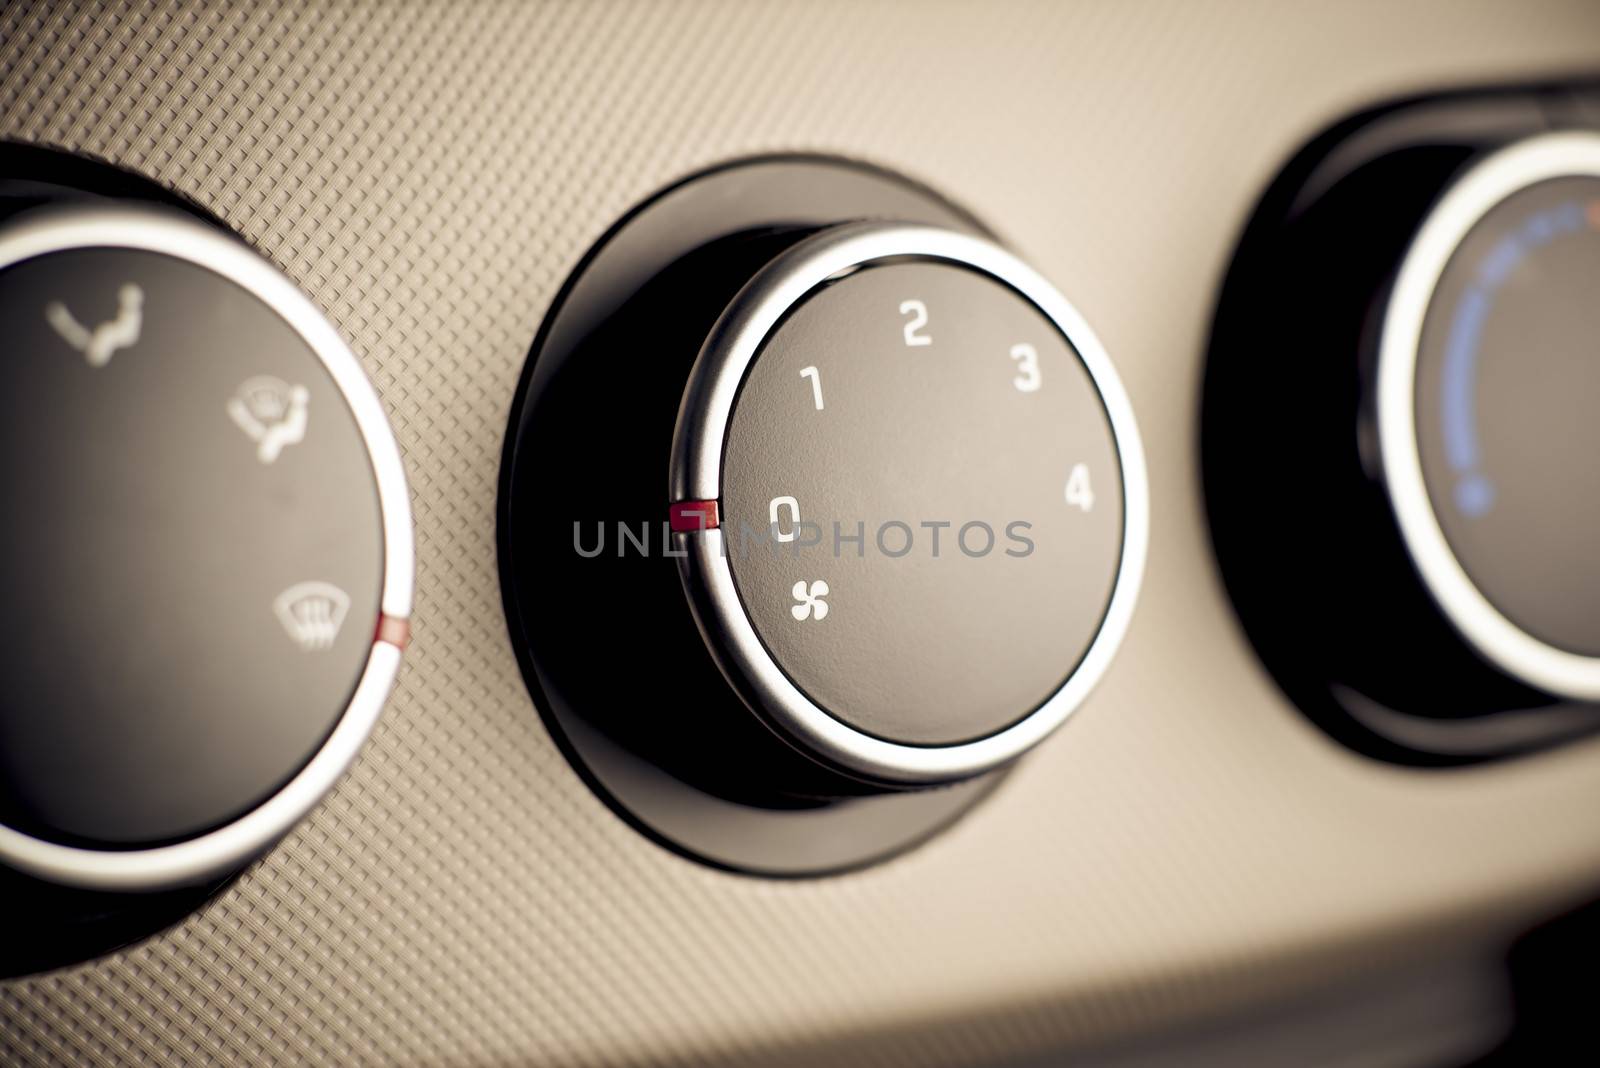 Climate controls instrument panel in car, vehicle. by westernstudio